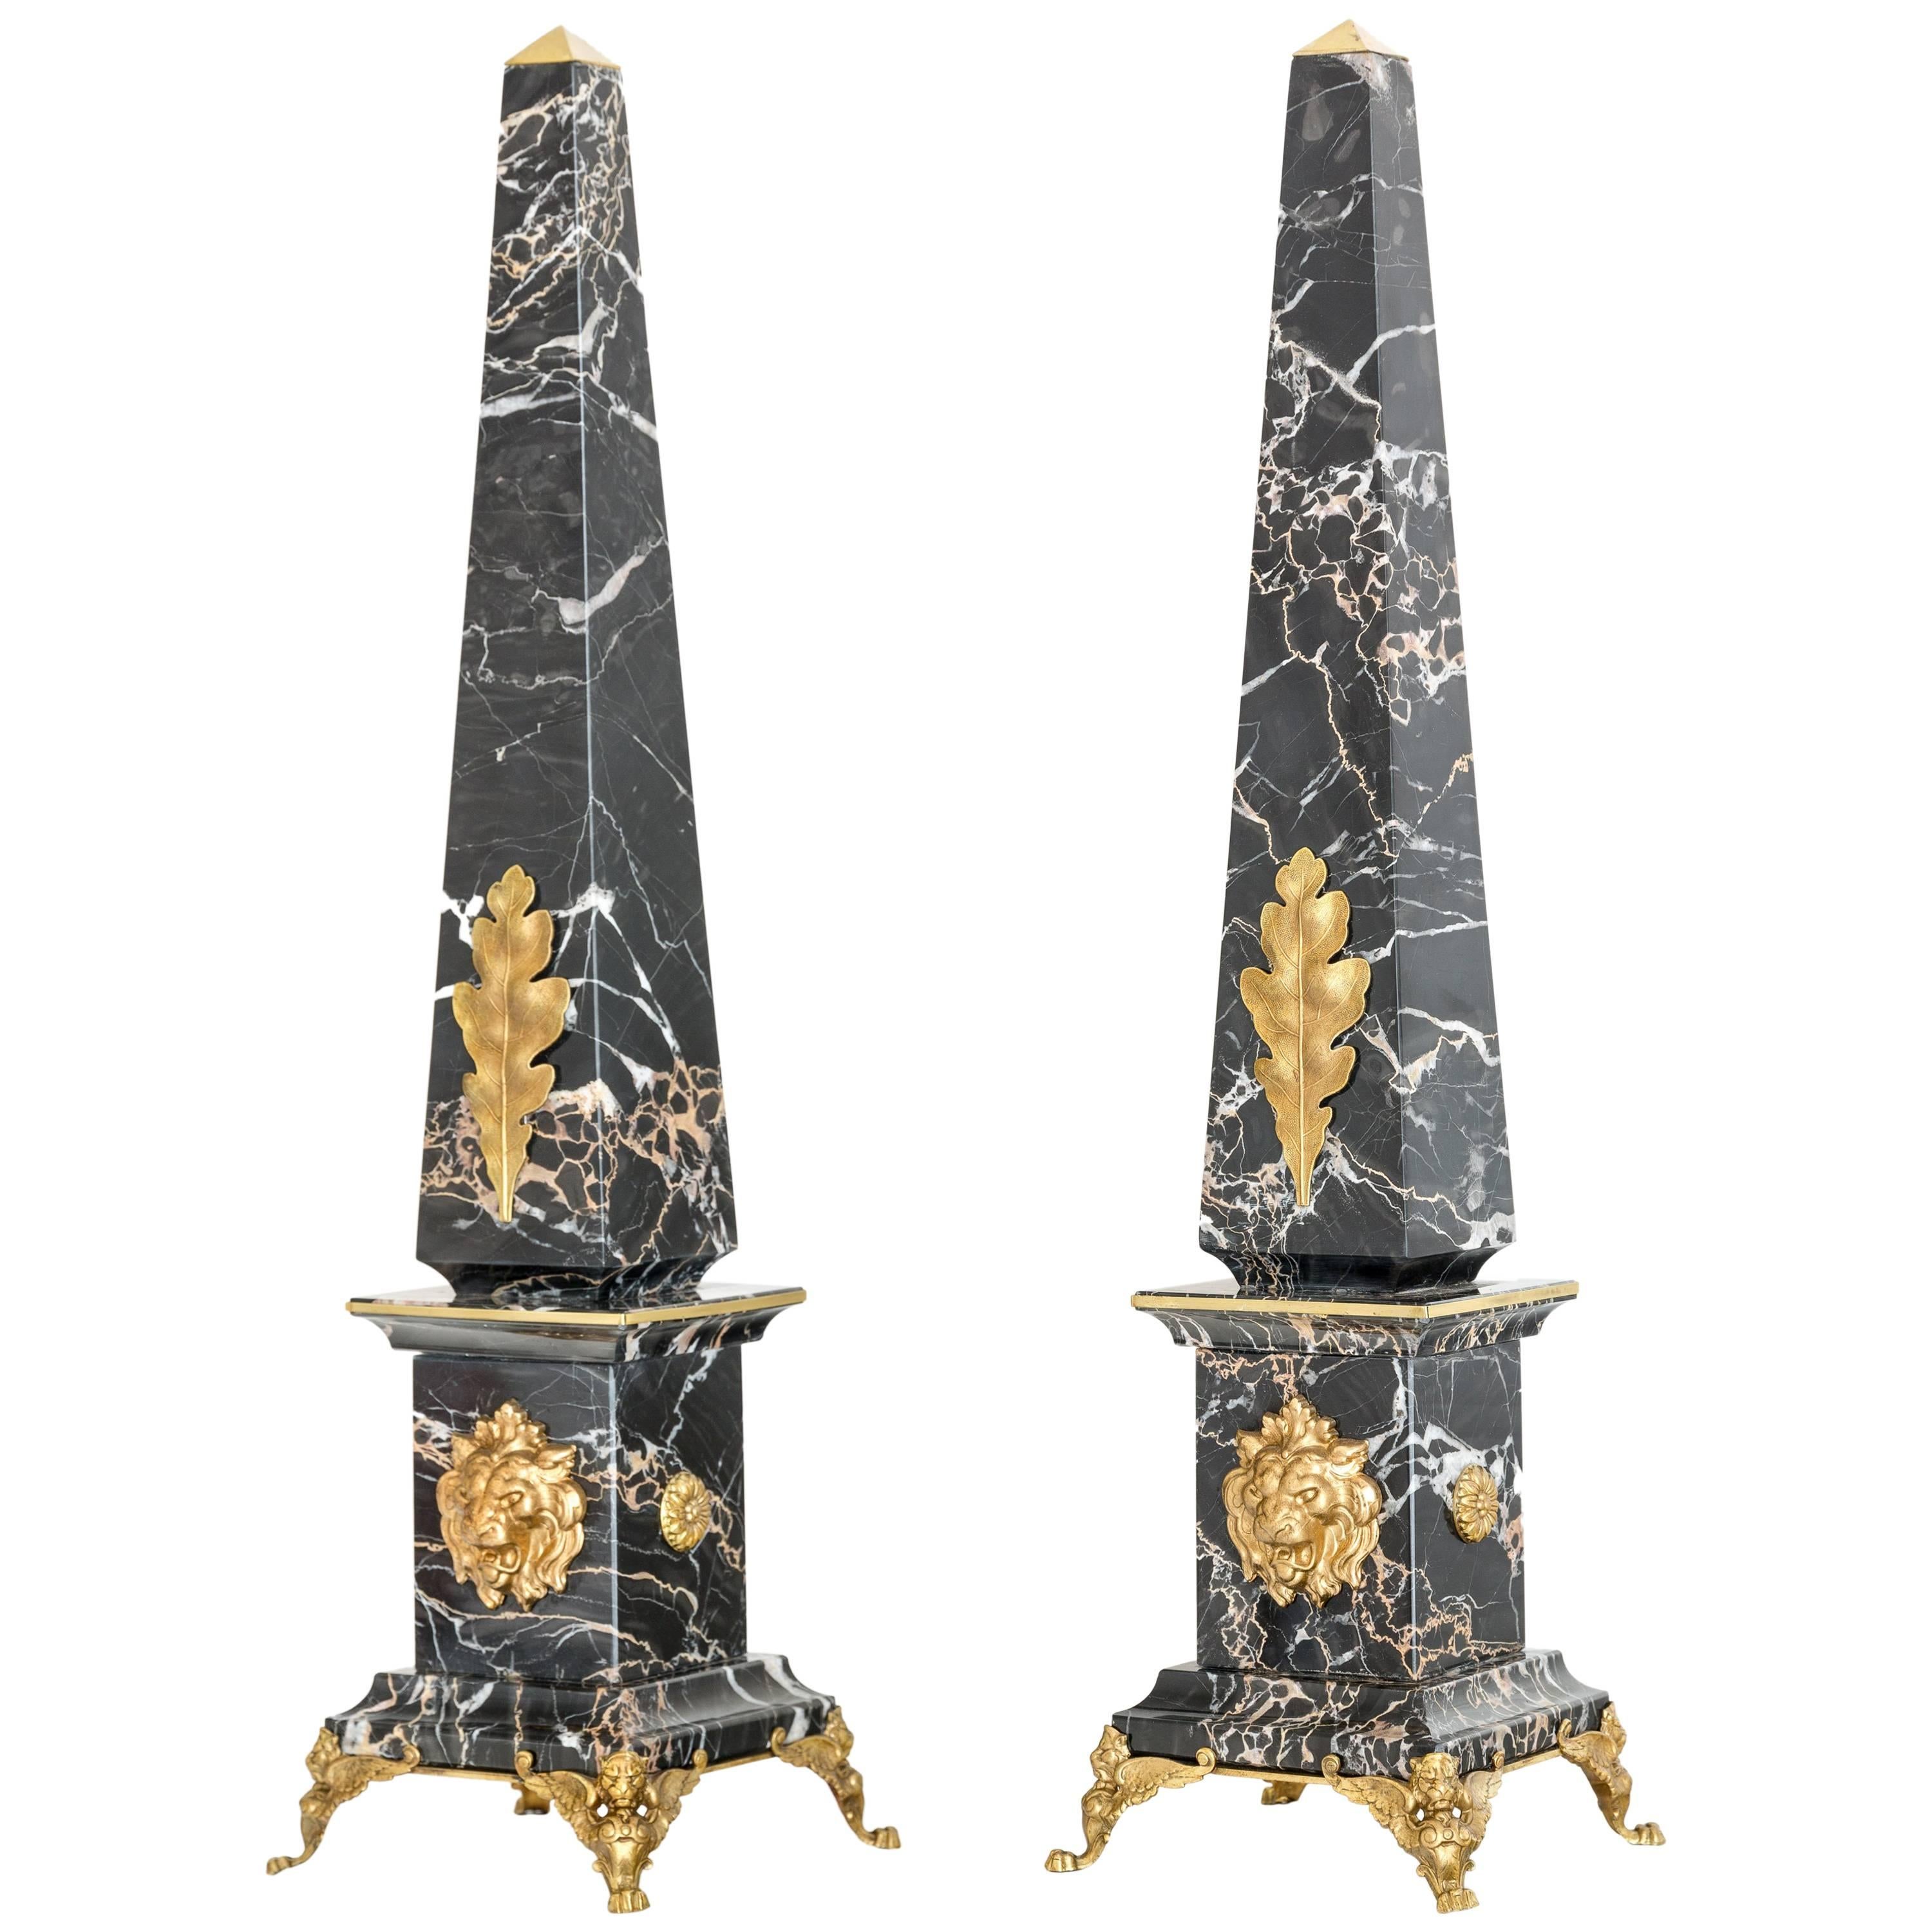 Pair of Portoro Marble and Bronze Obelisks "Gold Lion", Limited Edition, 2017 